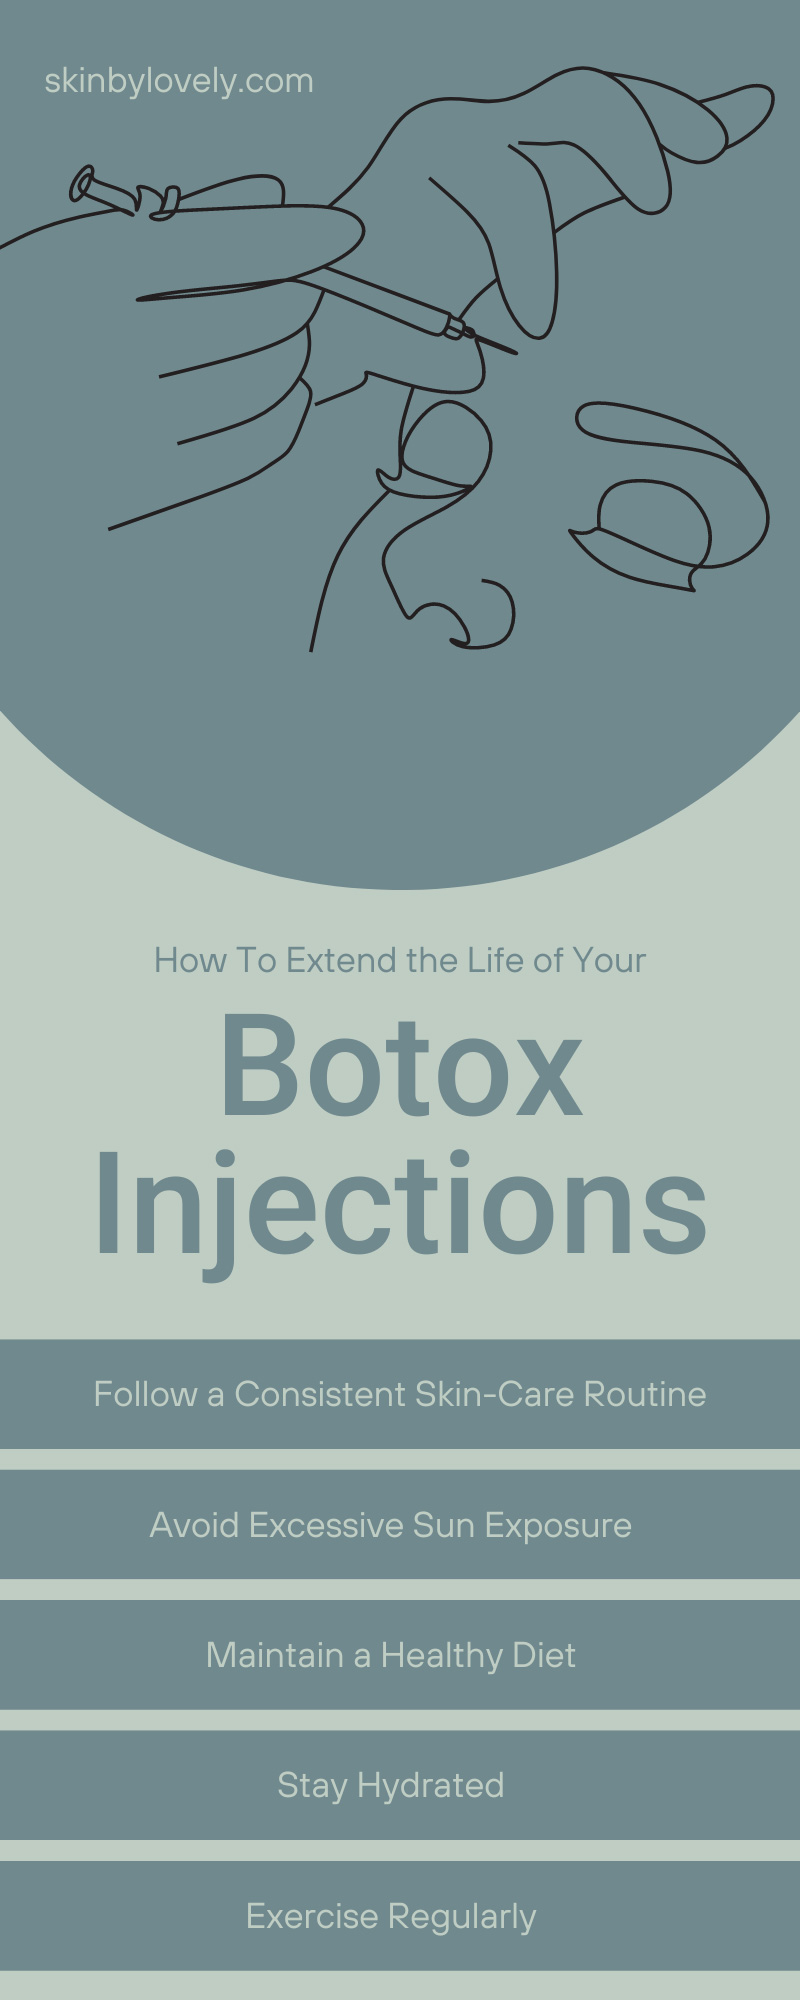 How To Extend the Life of Your Botox Injections